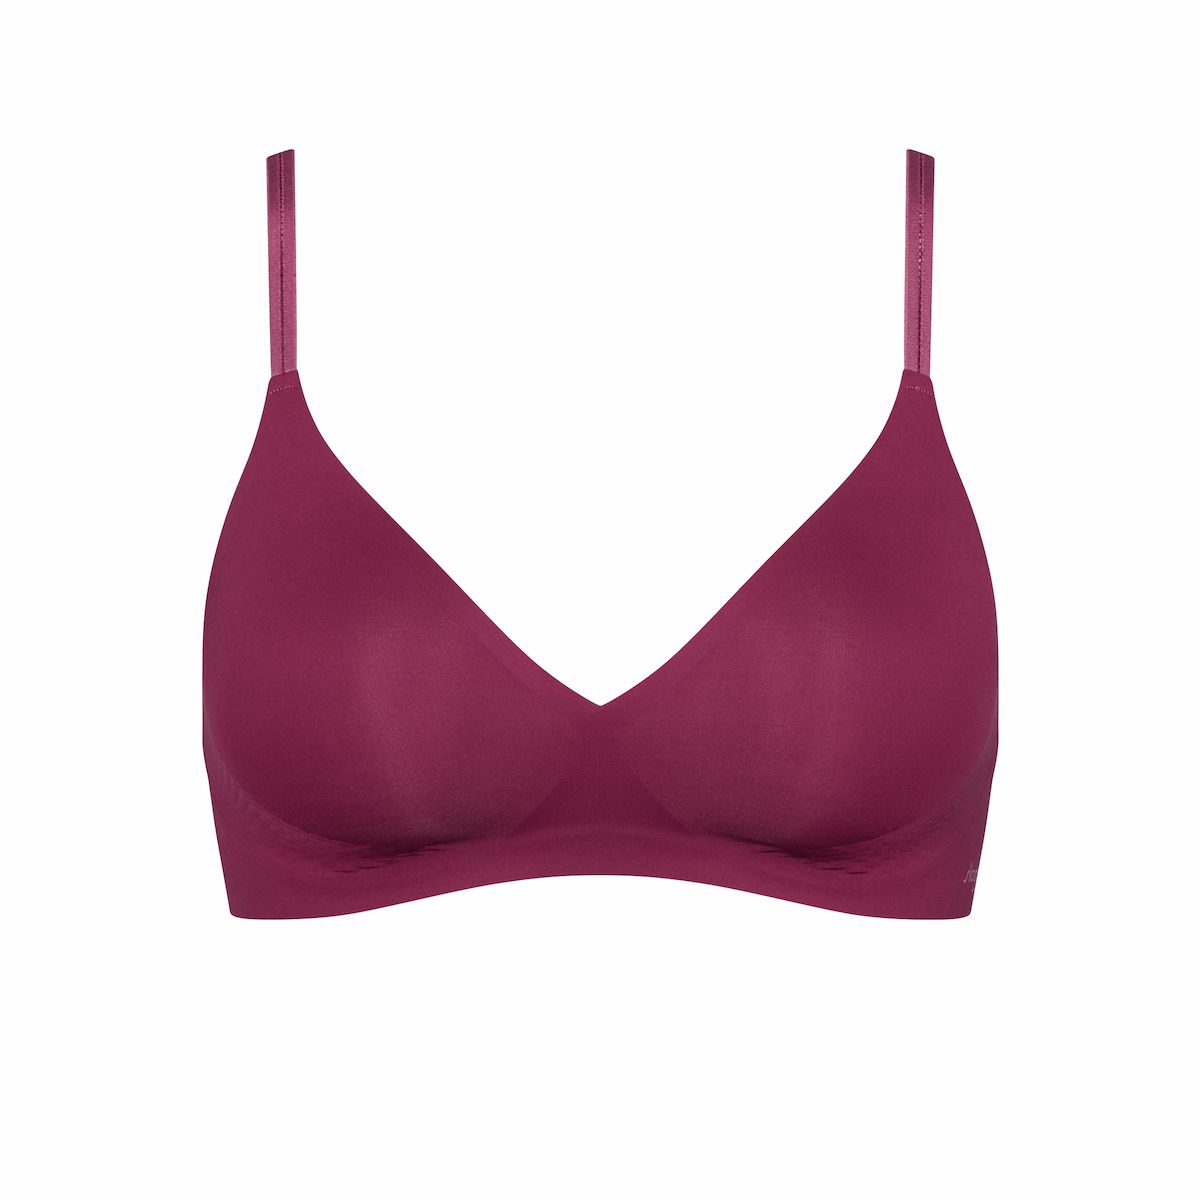 sloggi, Let ROMANCE grow as we usher into the Lunar New Year~ Ready to  pick up a few bras in your lucky colour? This best-of-both-worlds sloggi bra  brings